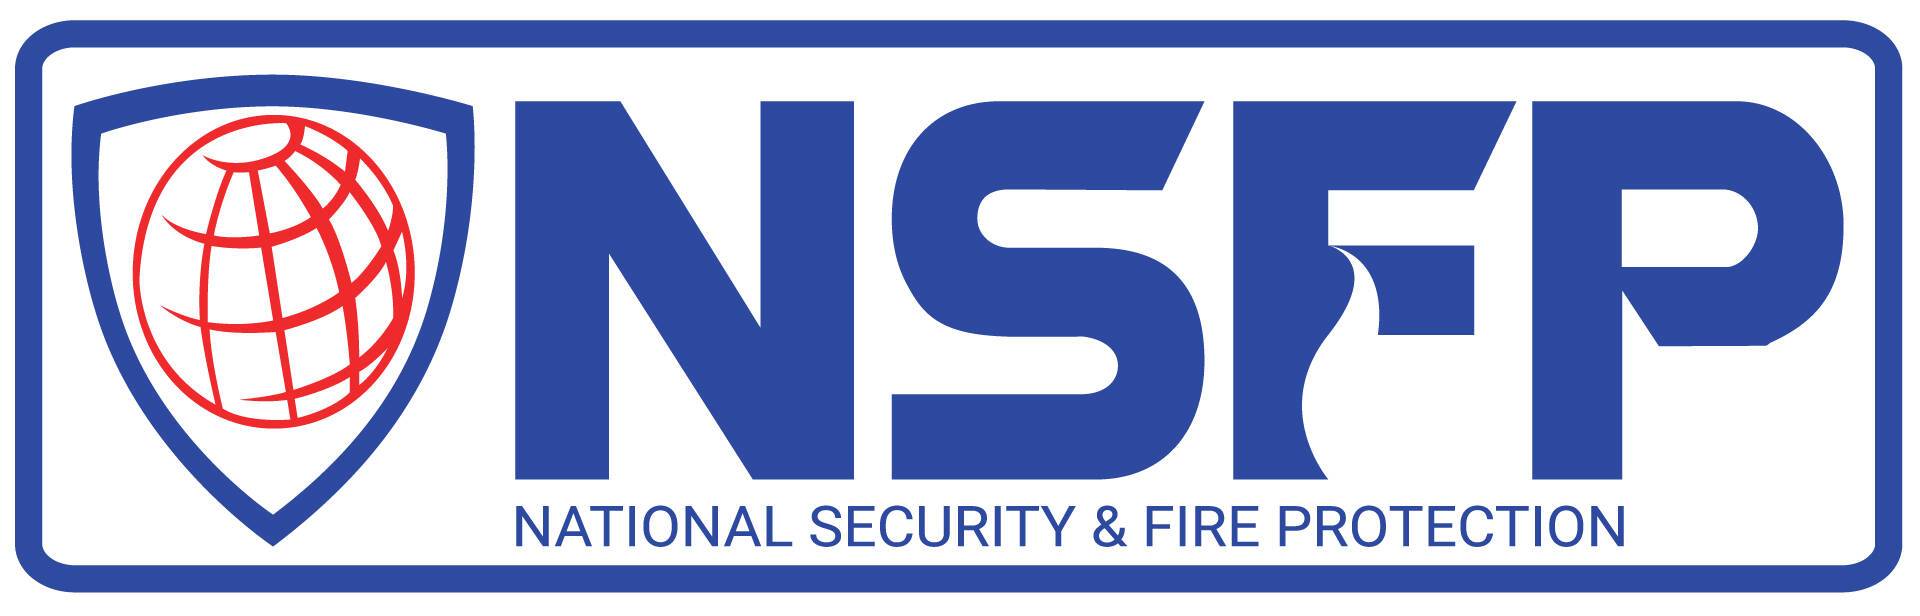 National Security & Fire Protection